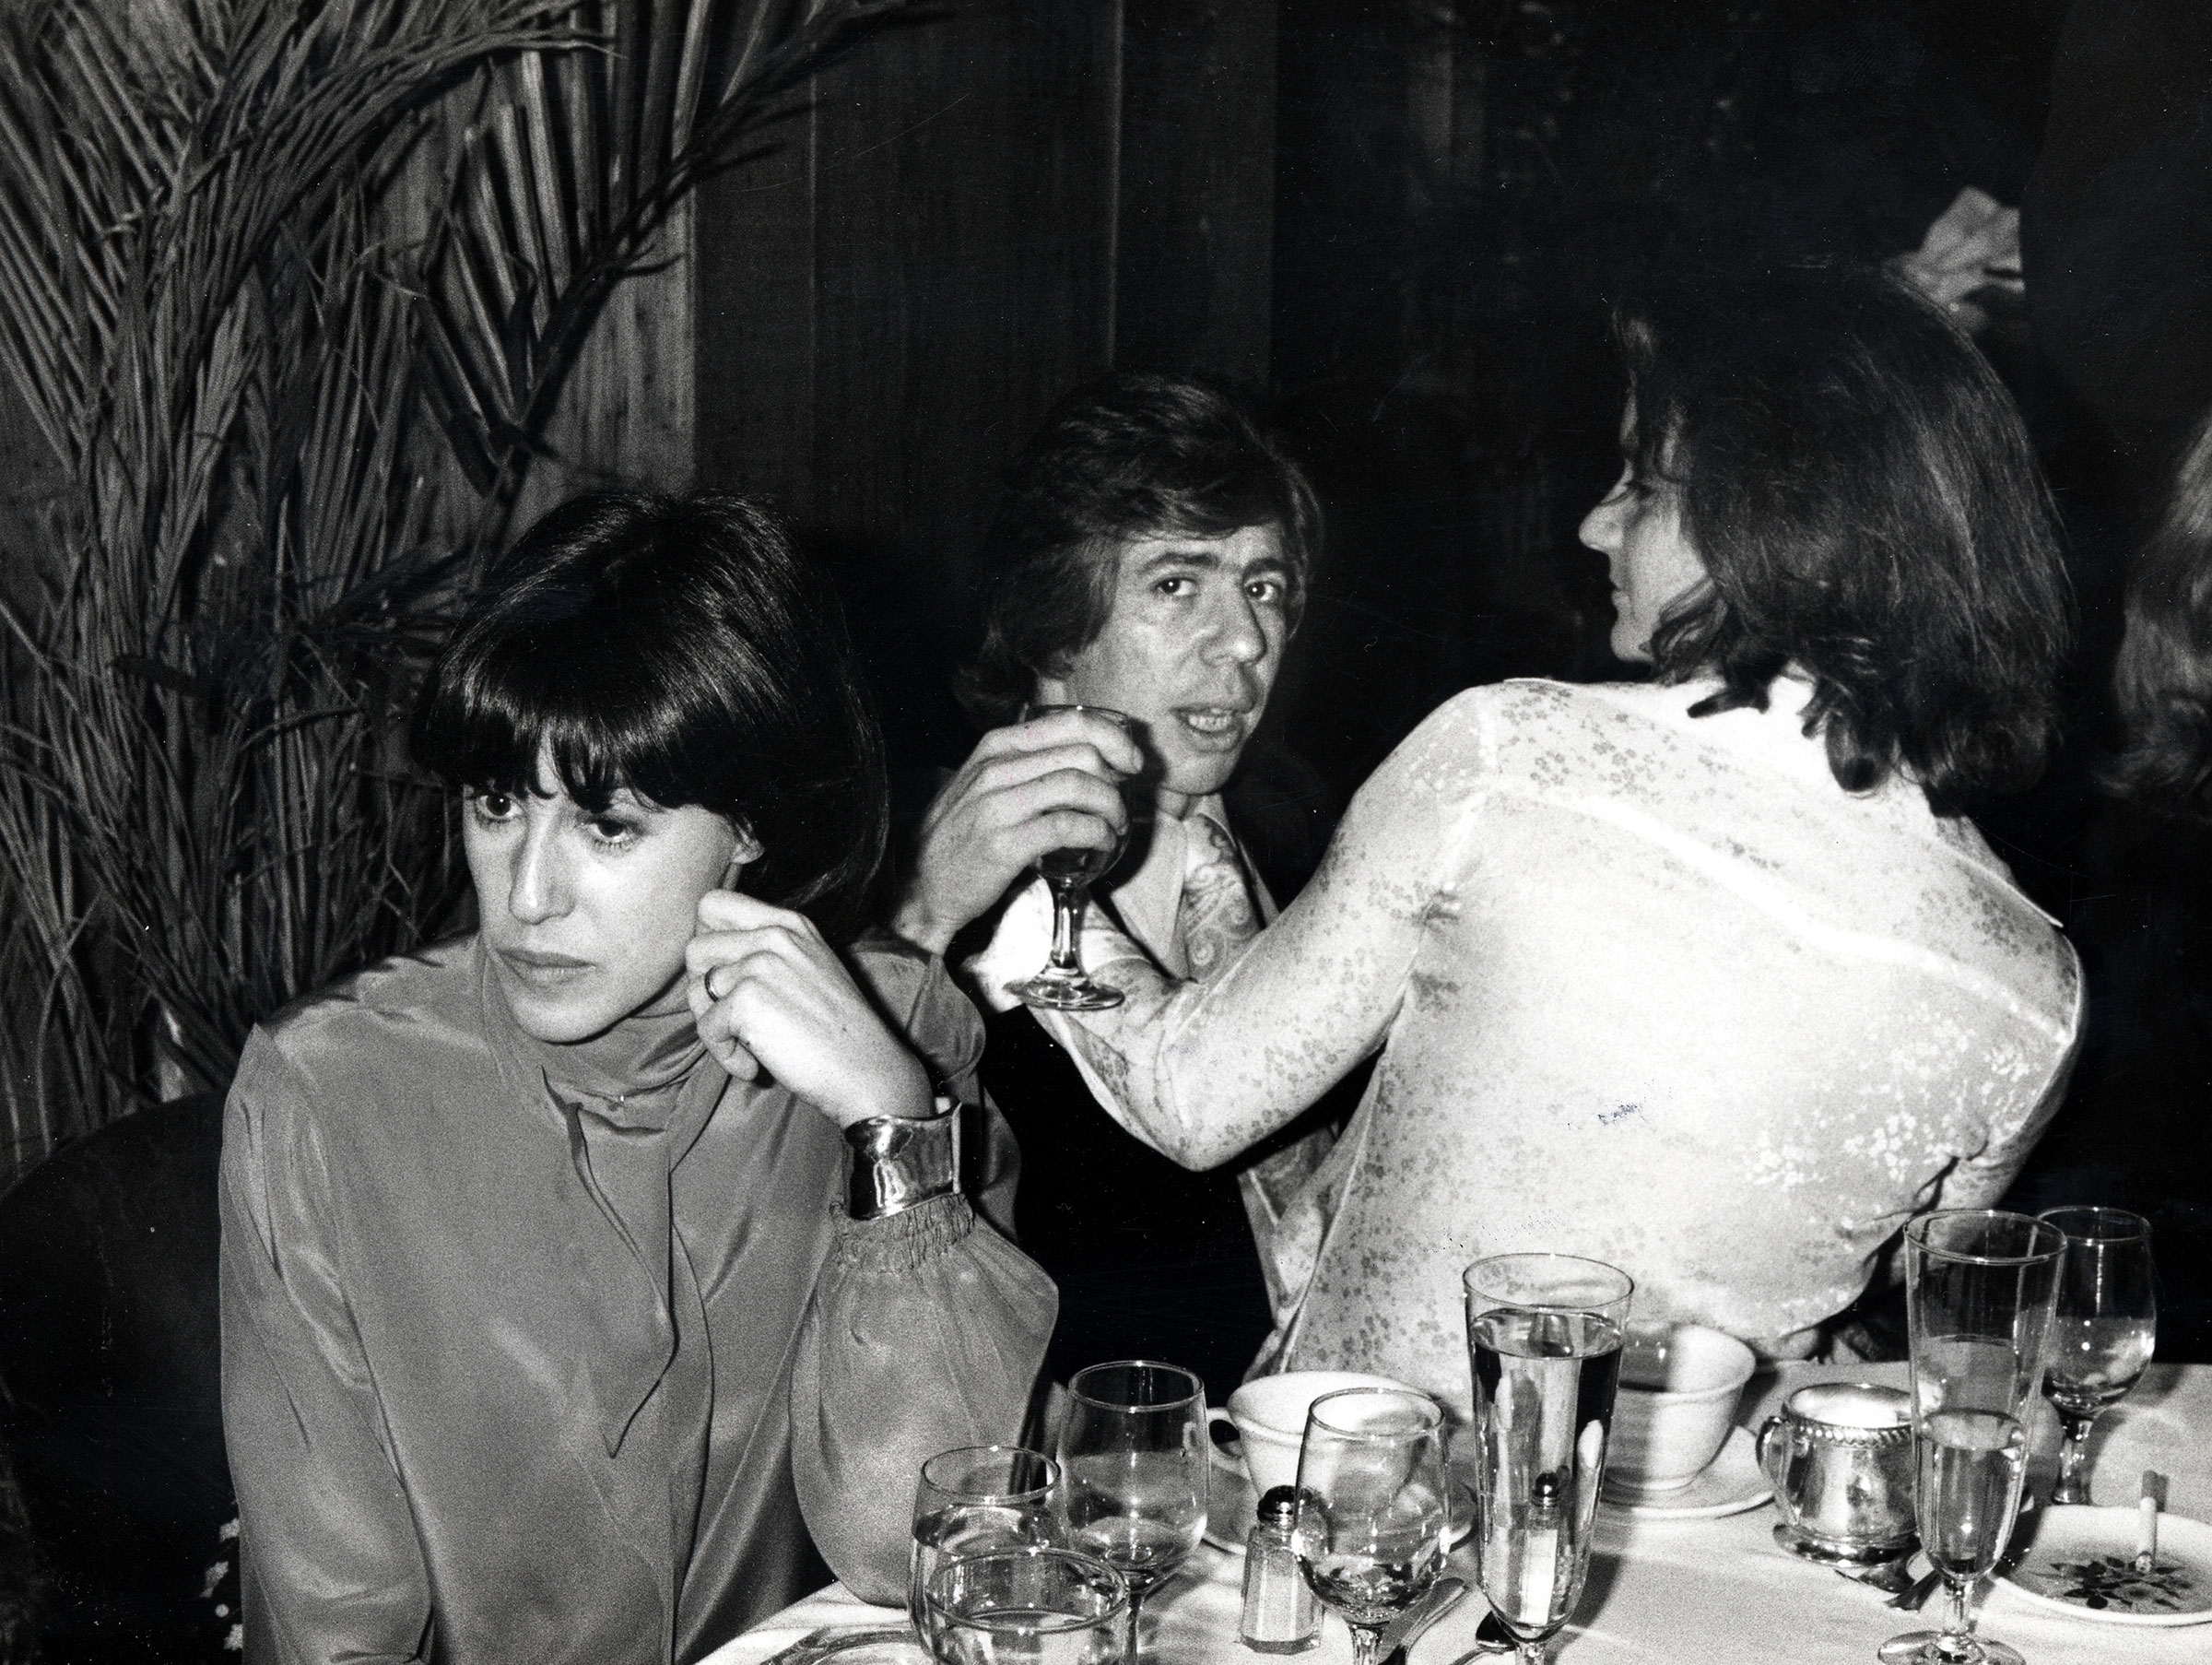 The marriage of Nora Ephron (left) and Carl Bernstein, pictured with another guest at a 1977 New York City event, was the subject of media gossip and scrutiny. (Ron Galella Collection/Getty Images)